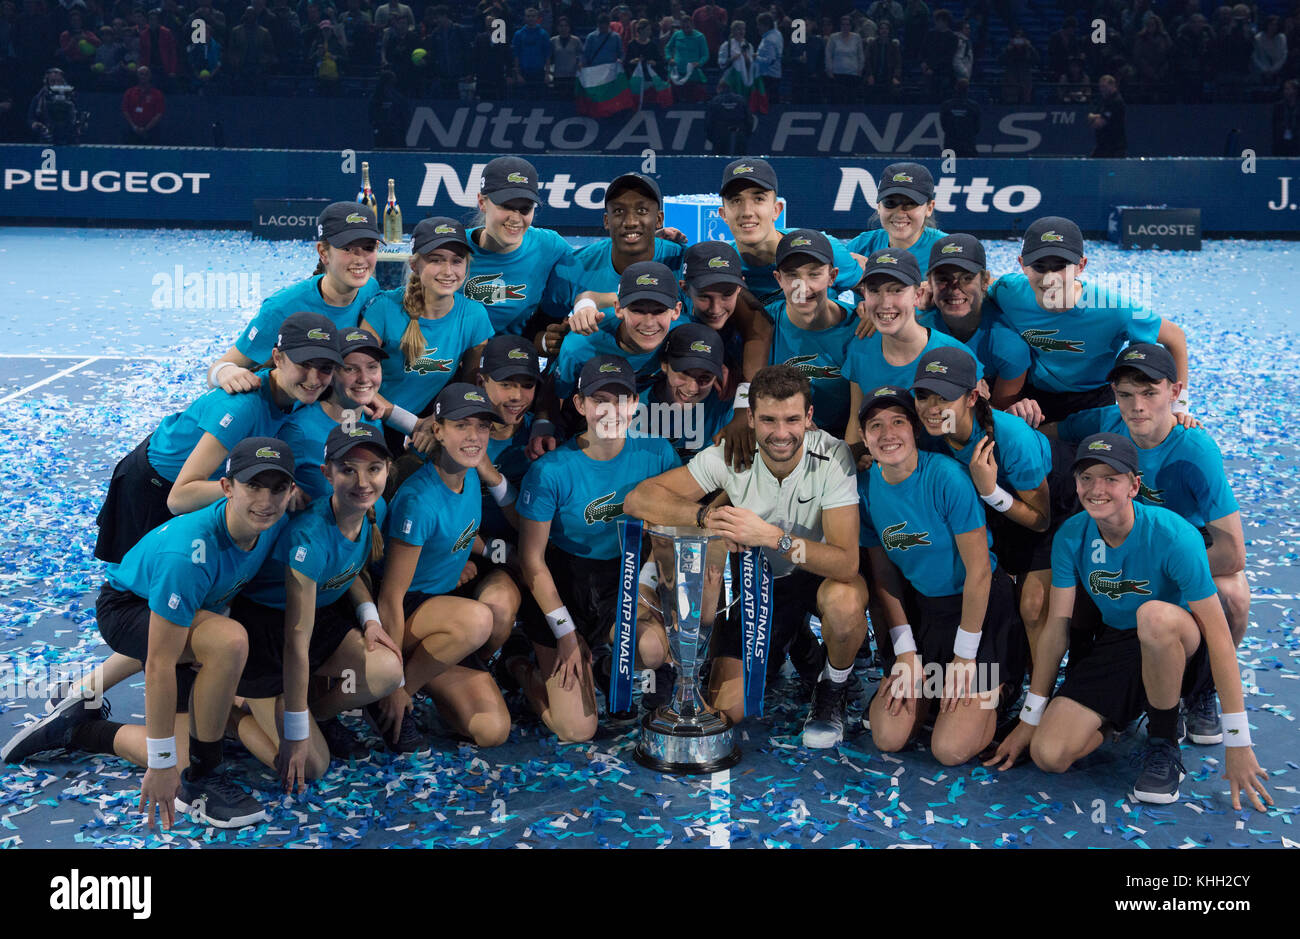 O2, London, UK. 19 November, 2017. Nitto ATP Finals, Grigor Dimitrov  celebrates his singles finals win over David Goffin on centre court. Ball  kids surround the winner for a photograph. Credit: Malcolm